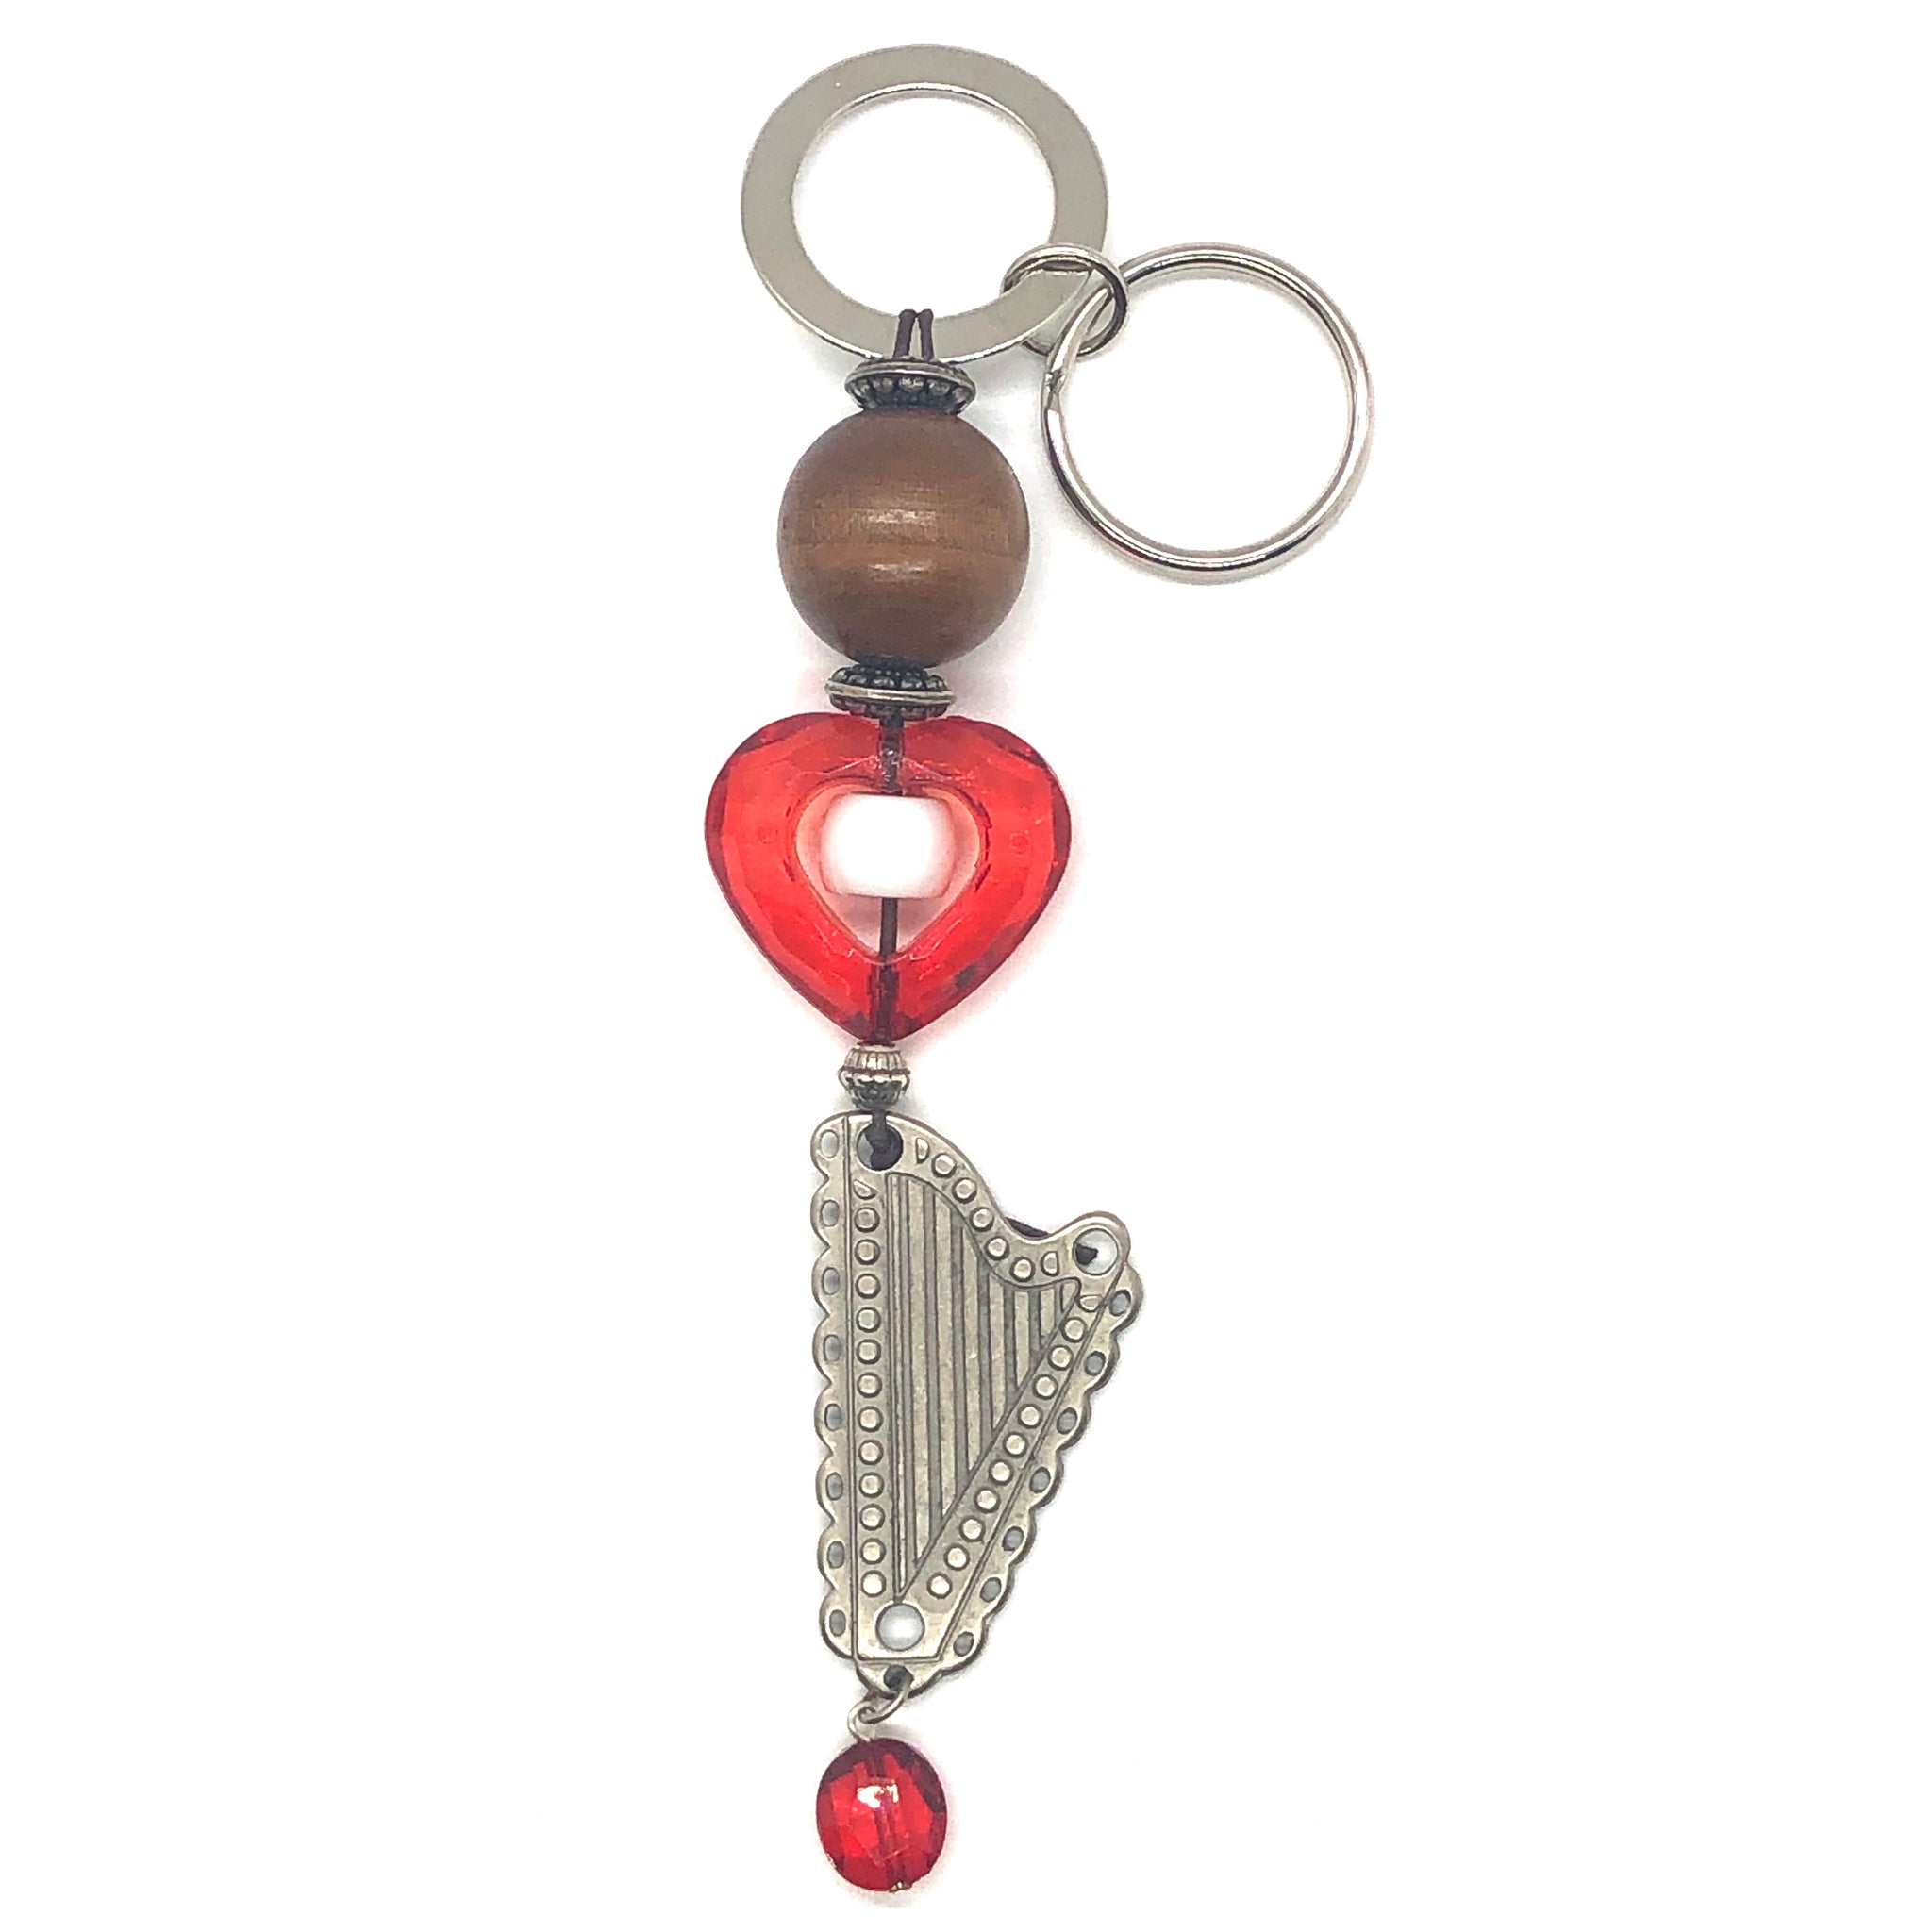 Key Holder/Purse Charm with RED HEART & METAL HARP